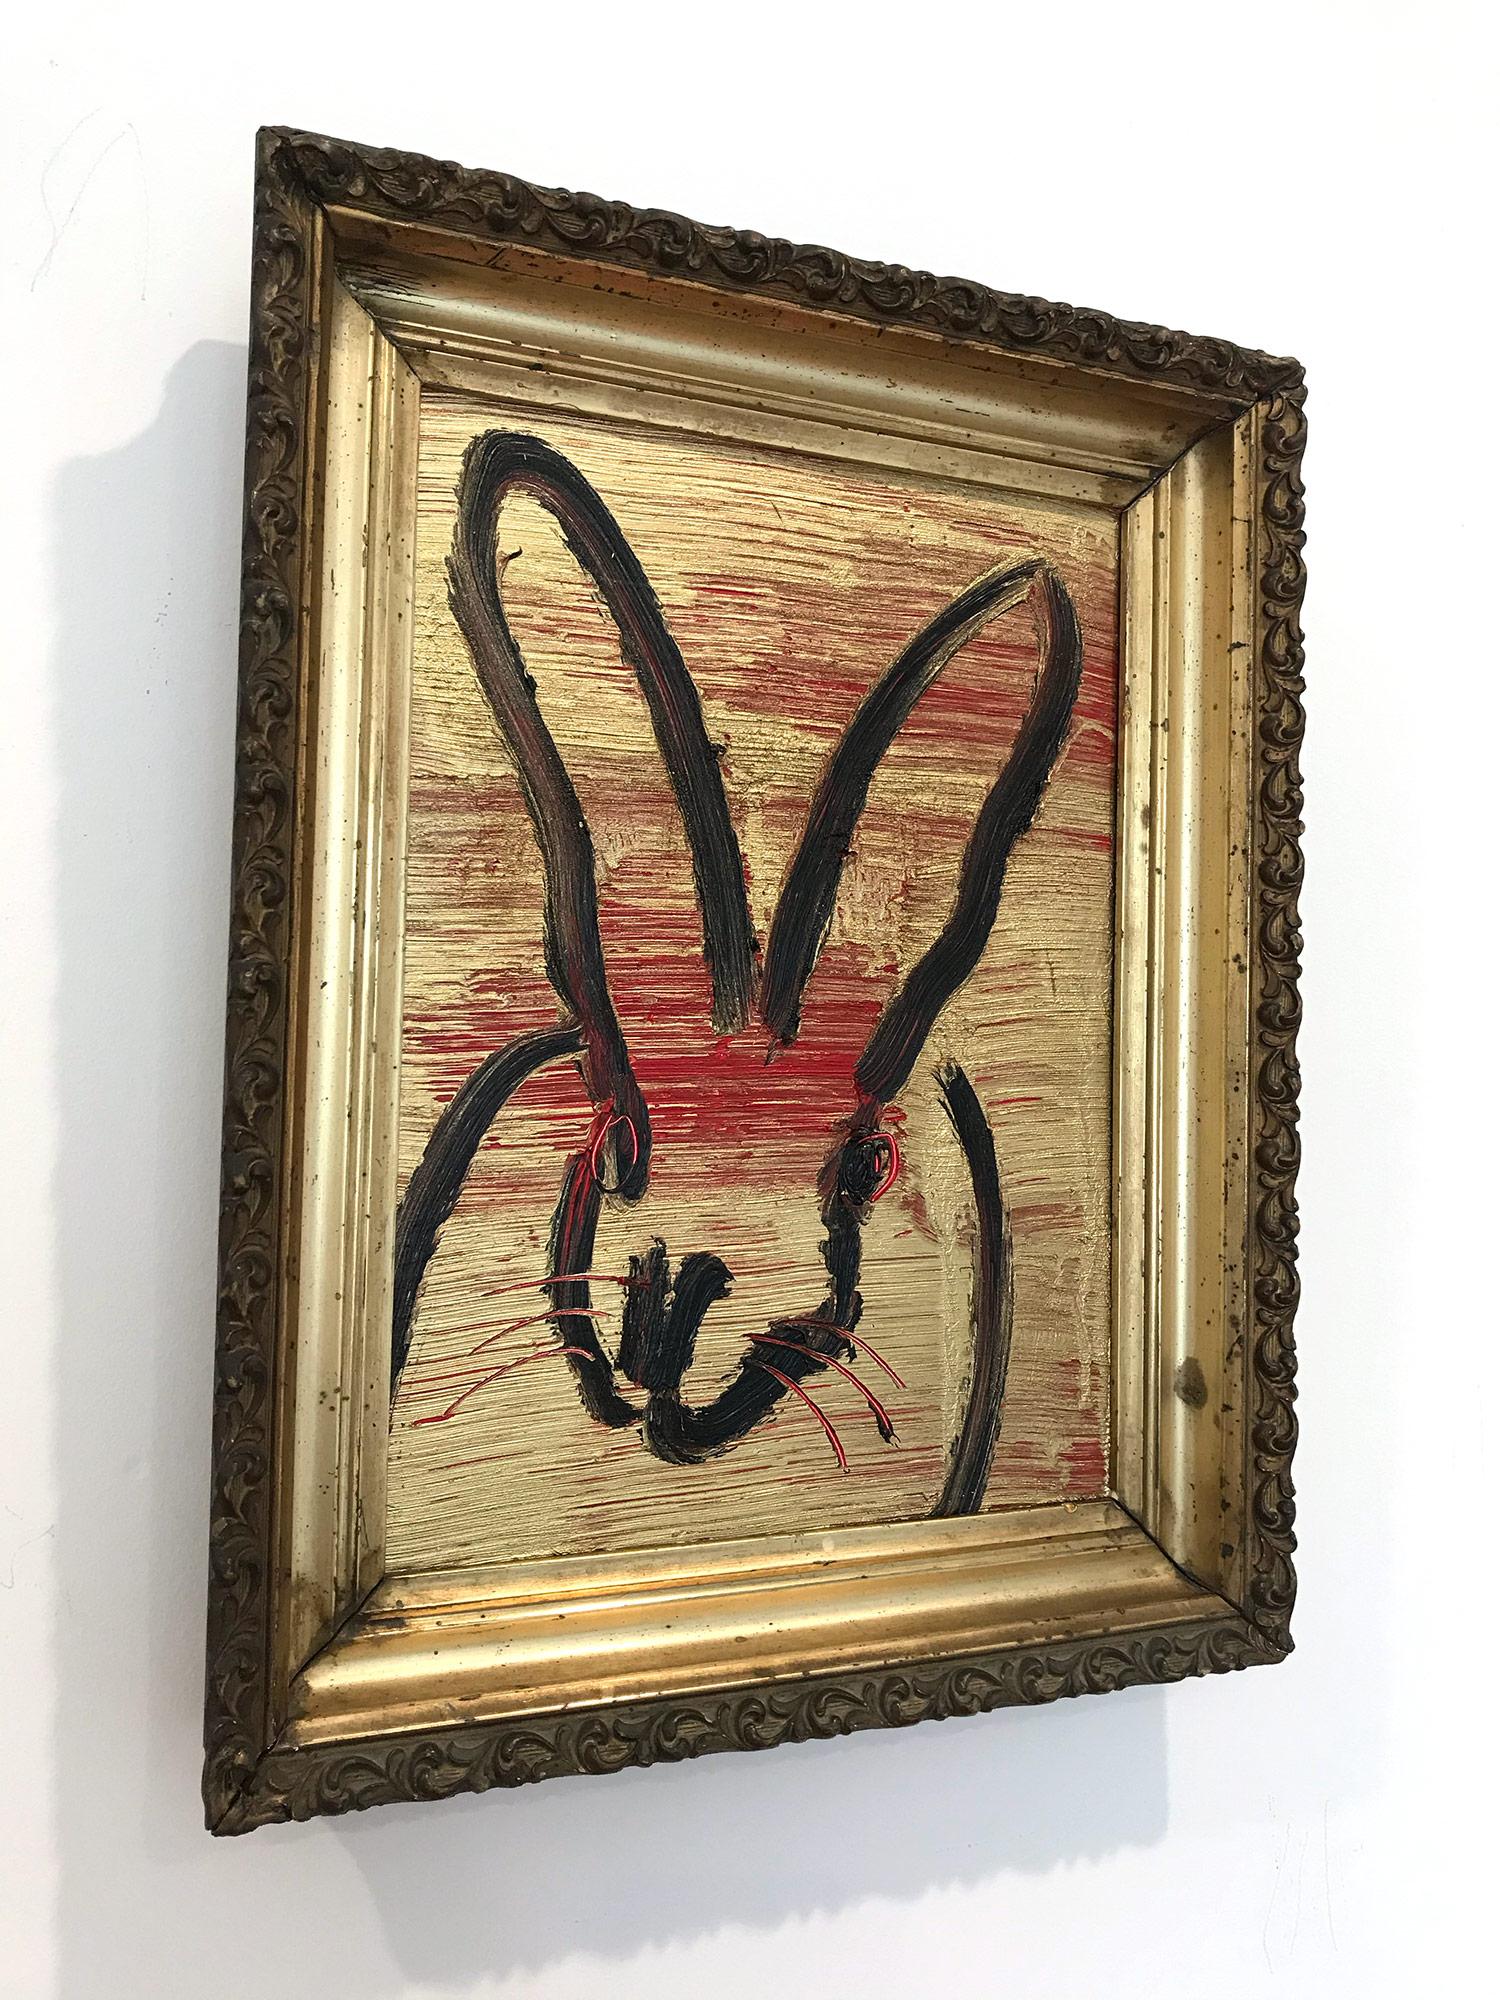 A wonderful composition of one of Slonem's most iconic subjects, Bunnies. This piece depicts a gestural figure of a black bunny on a gold background and red with thick use of oil paint. It is housed in a wonderful antique 19th Century frame.